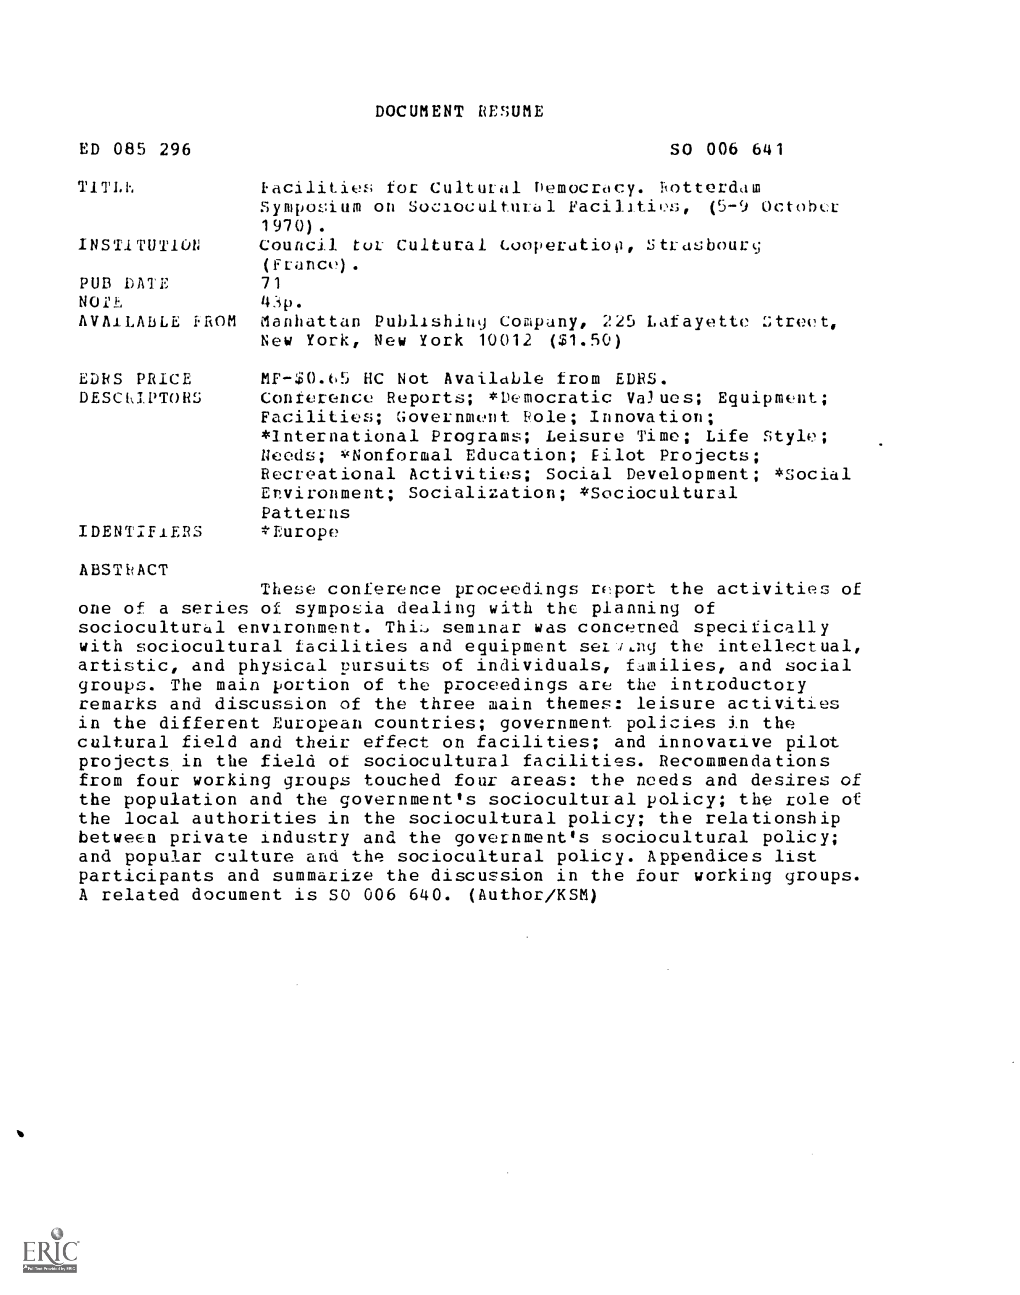 DOCUMENT RESUME ED 085 296 SO 006 641 TITLE Eacilities